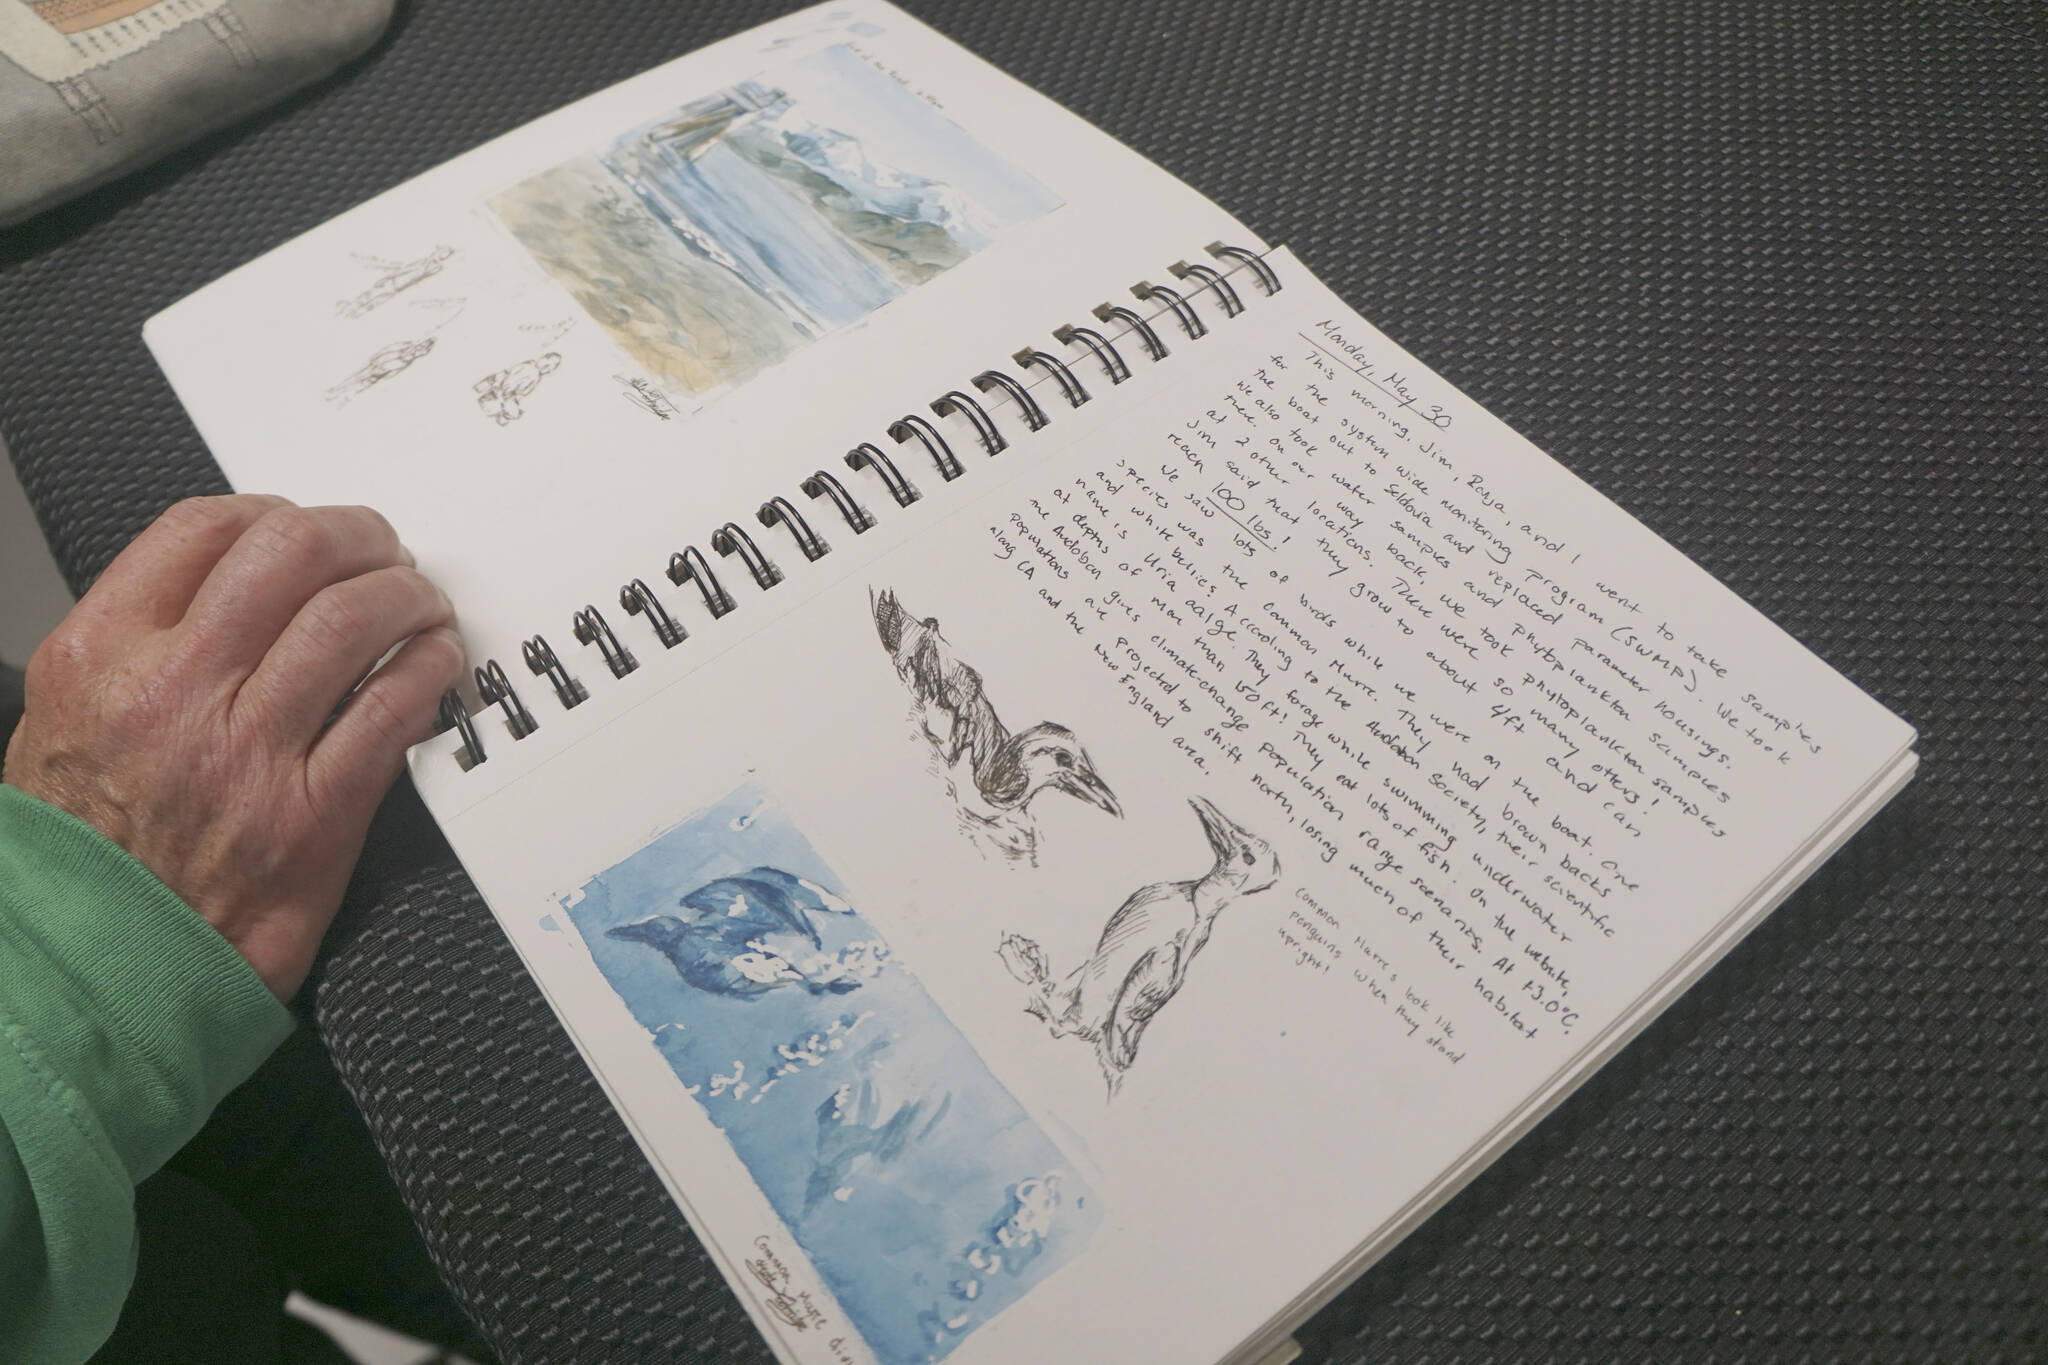 Ingrid Harrald looks at Kate Lochridge's sketch book at a pop-up viewing of her show on Friday, Aug. 5, 2022, at the Homer Council of the Arts in Homer, Alaska. (Photo by Michael Armstrong/Homer News)